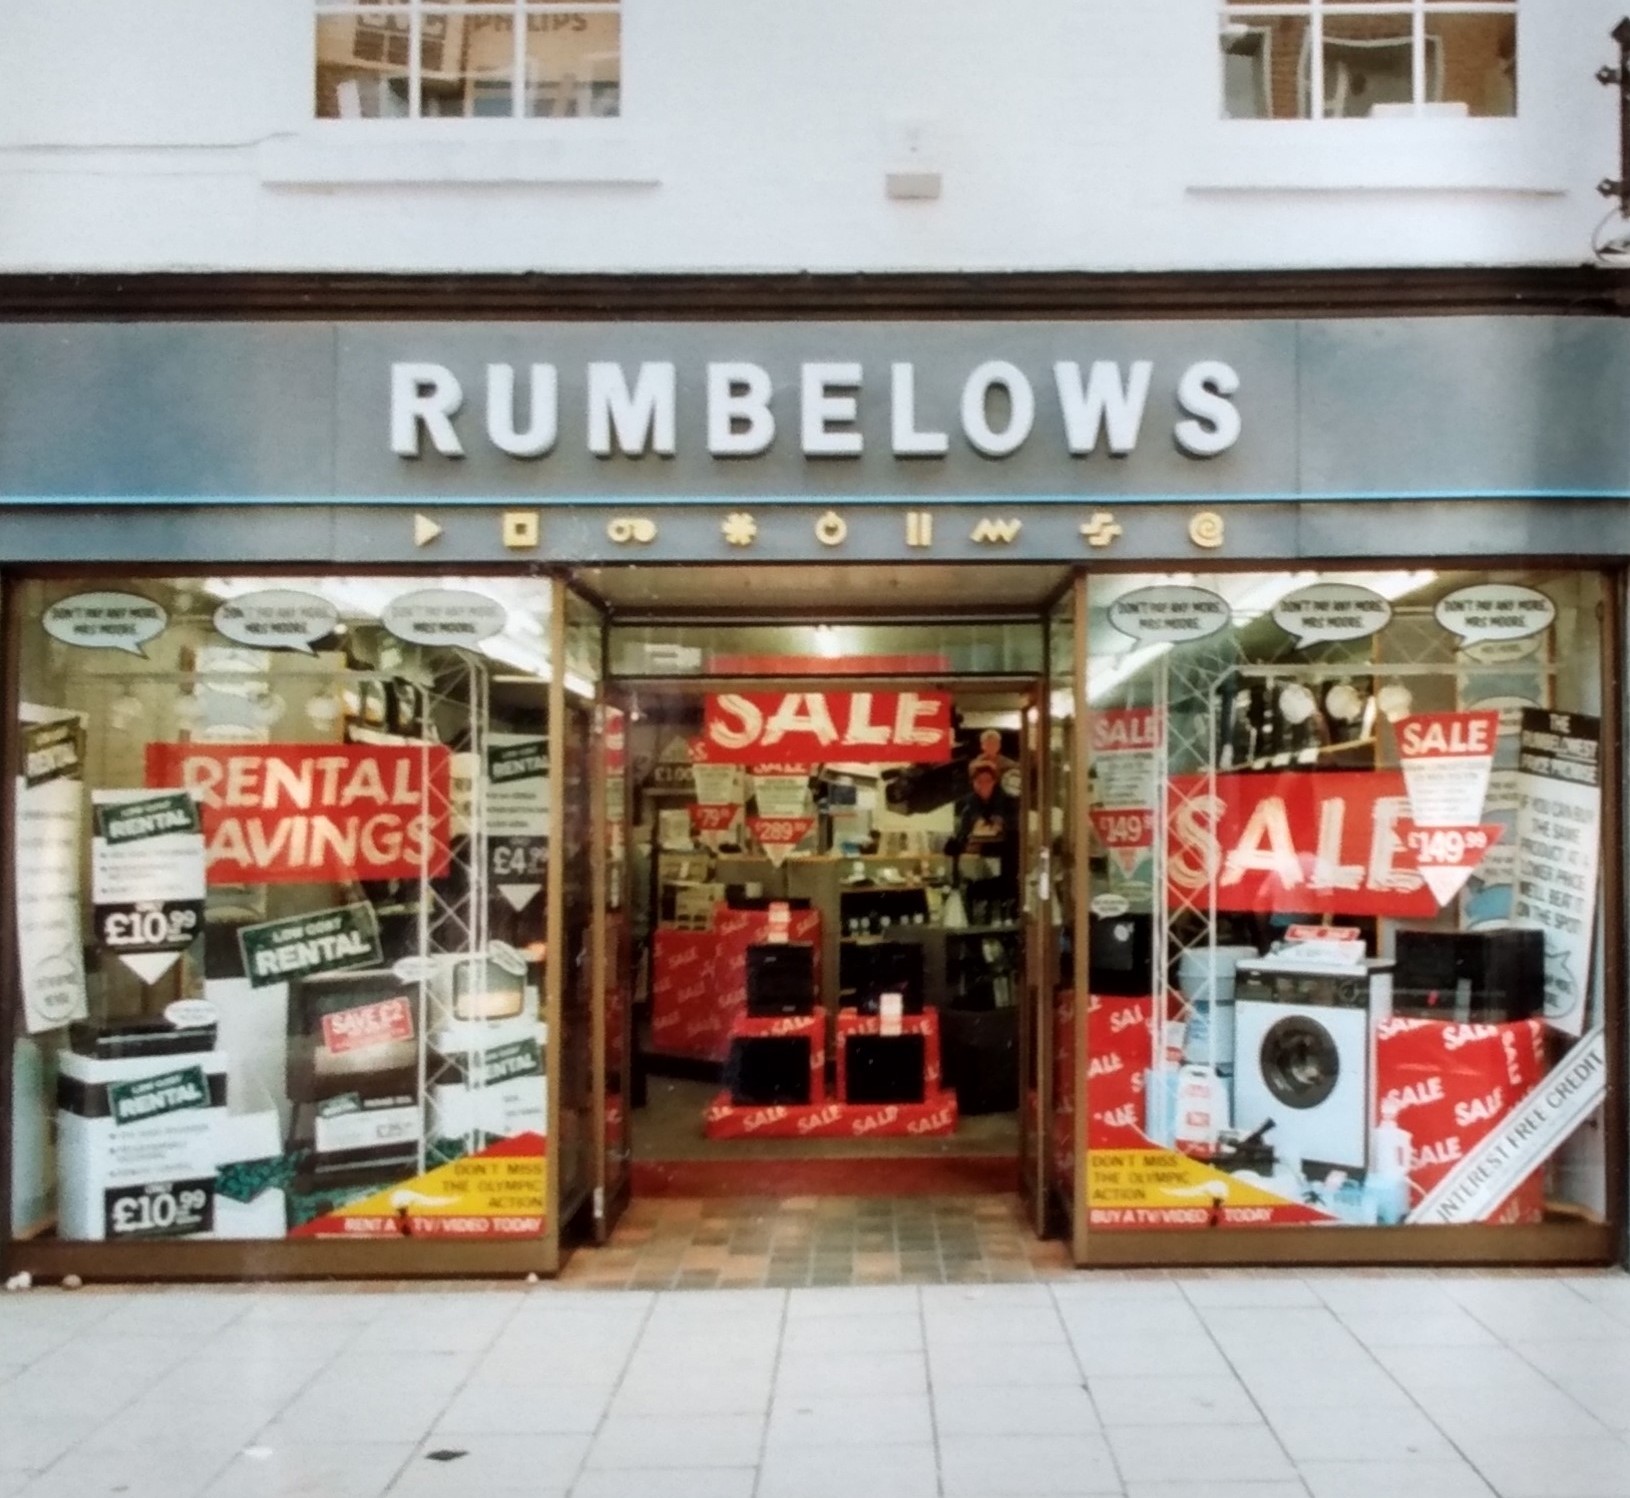 Rumbelows was a byword for electrical goods for many years